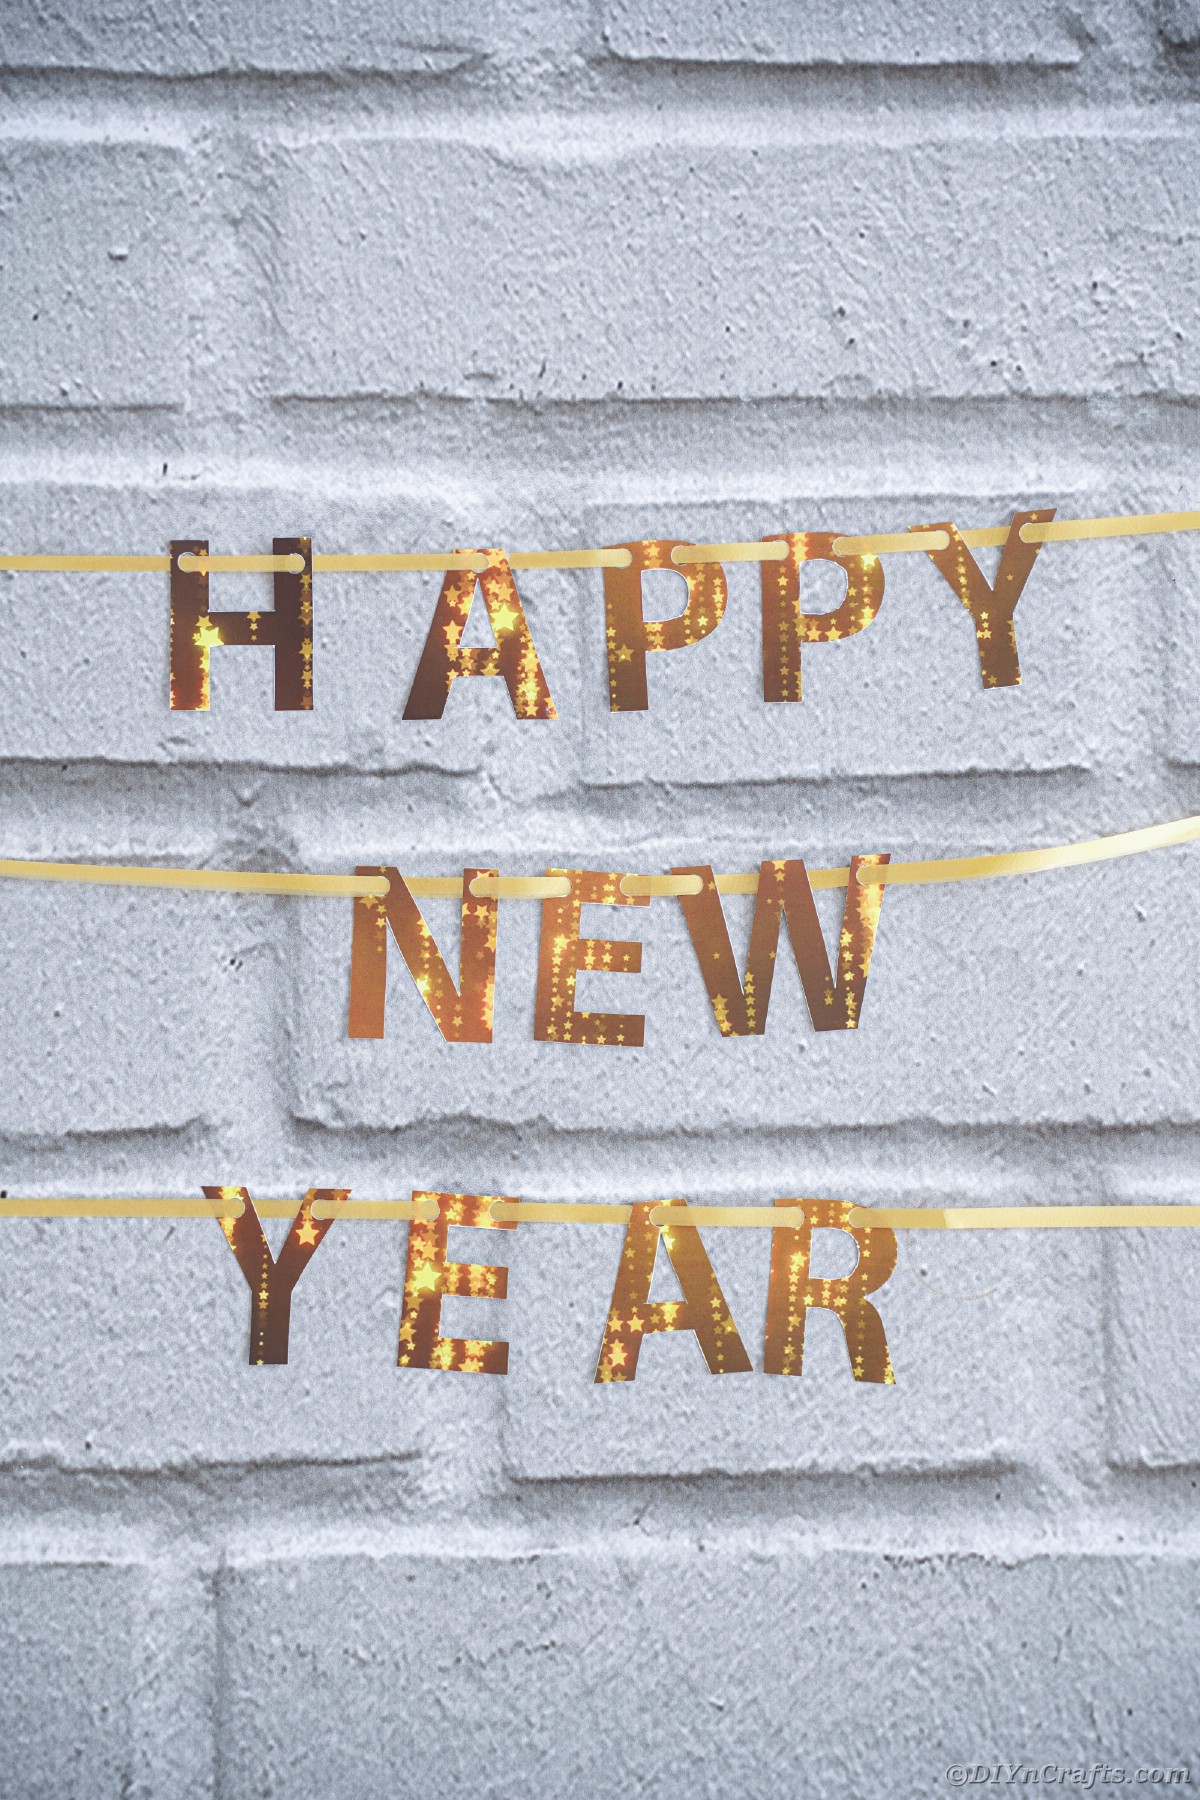 Happy New Year banner against brick wall